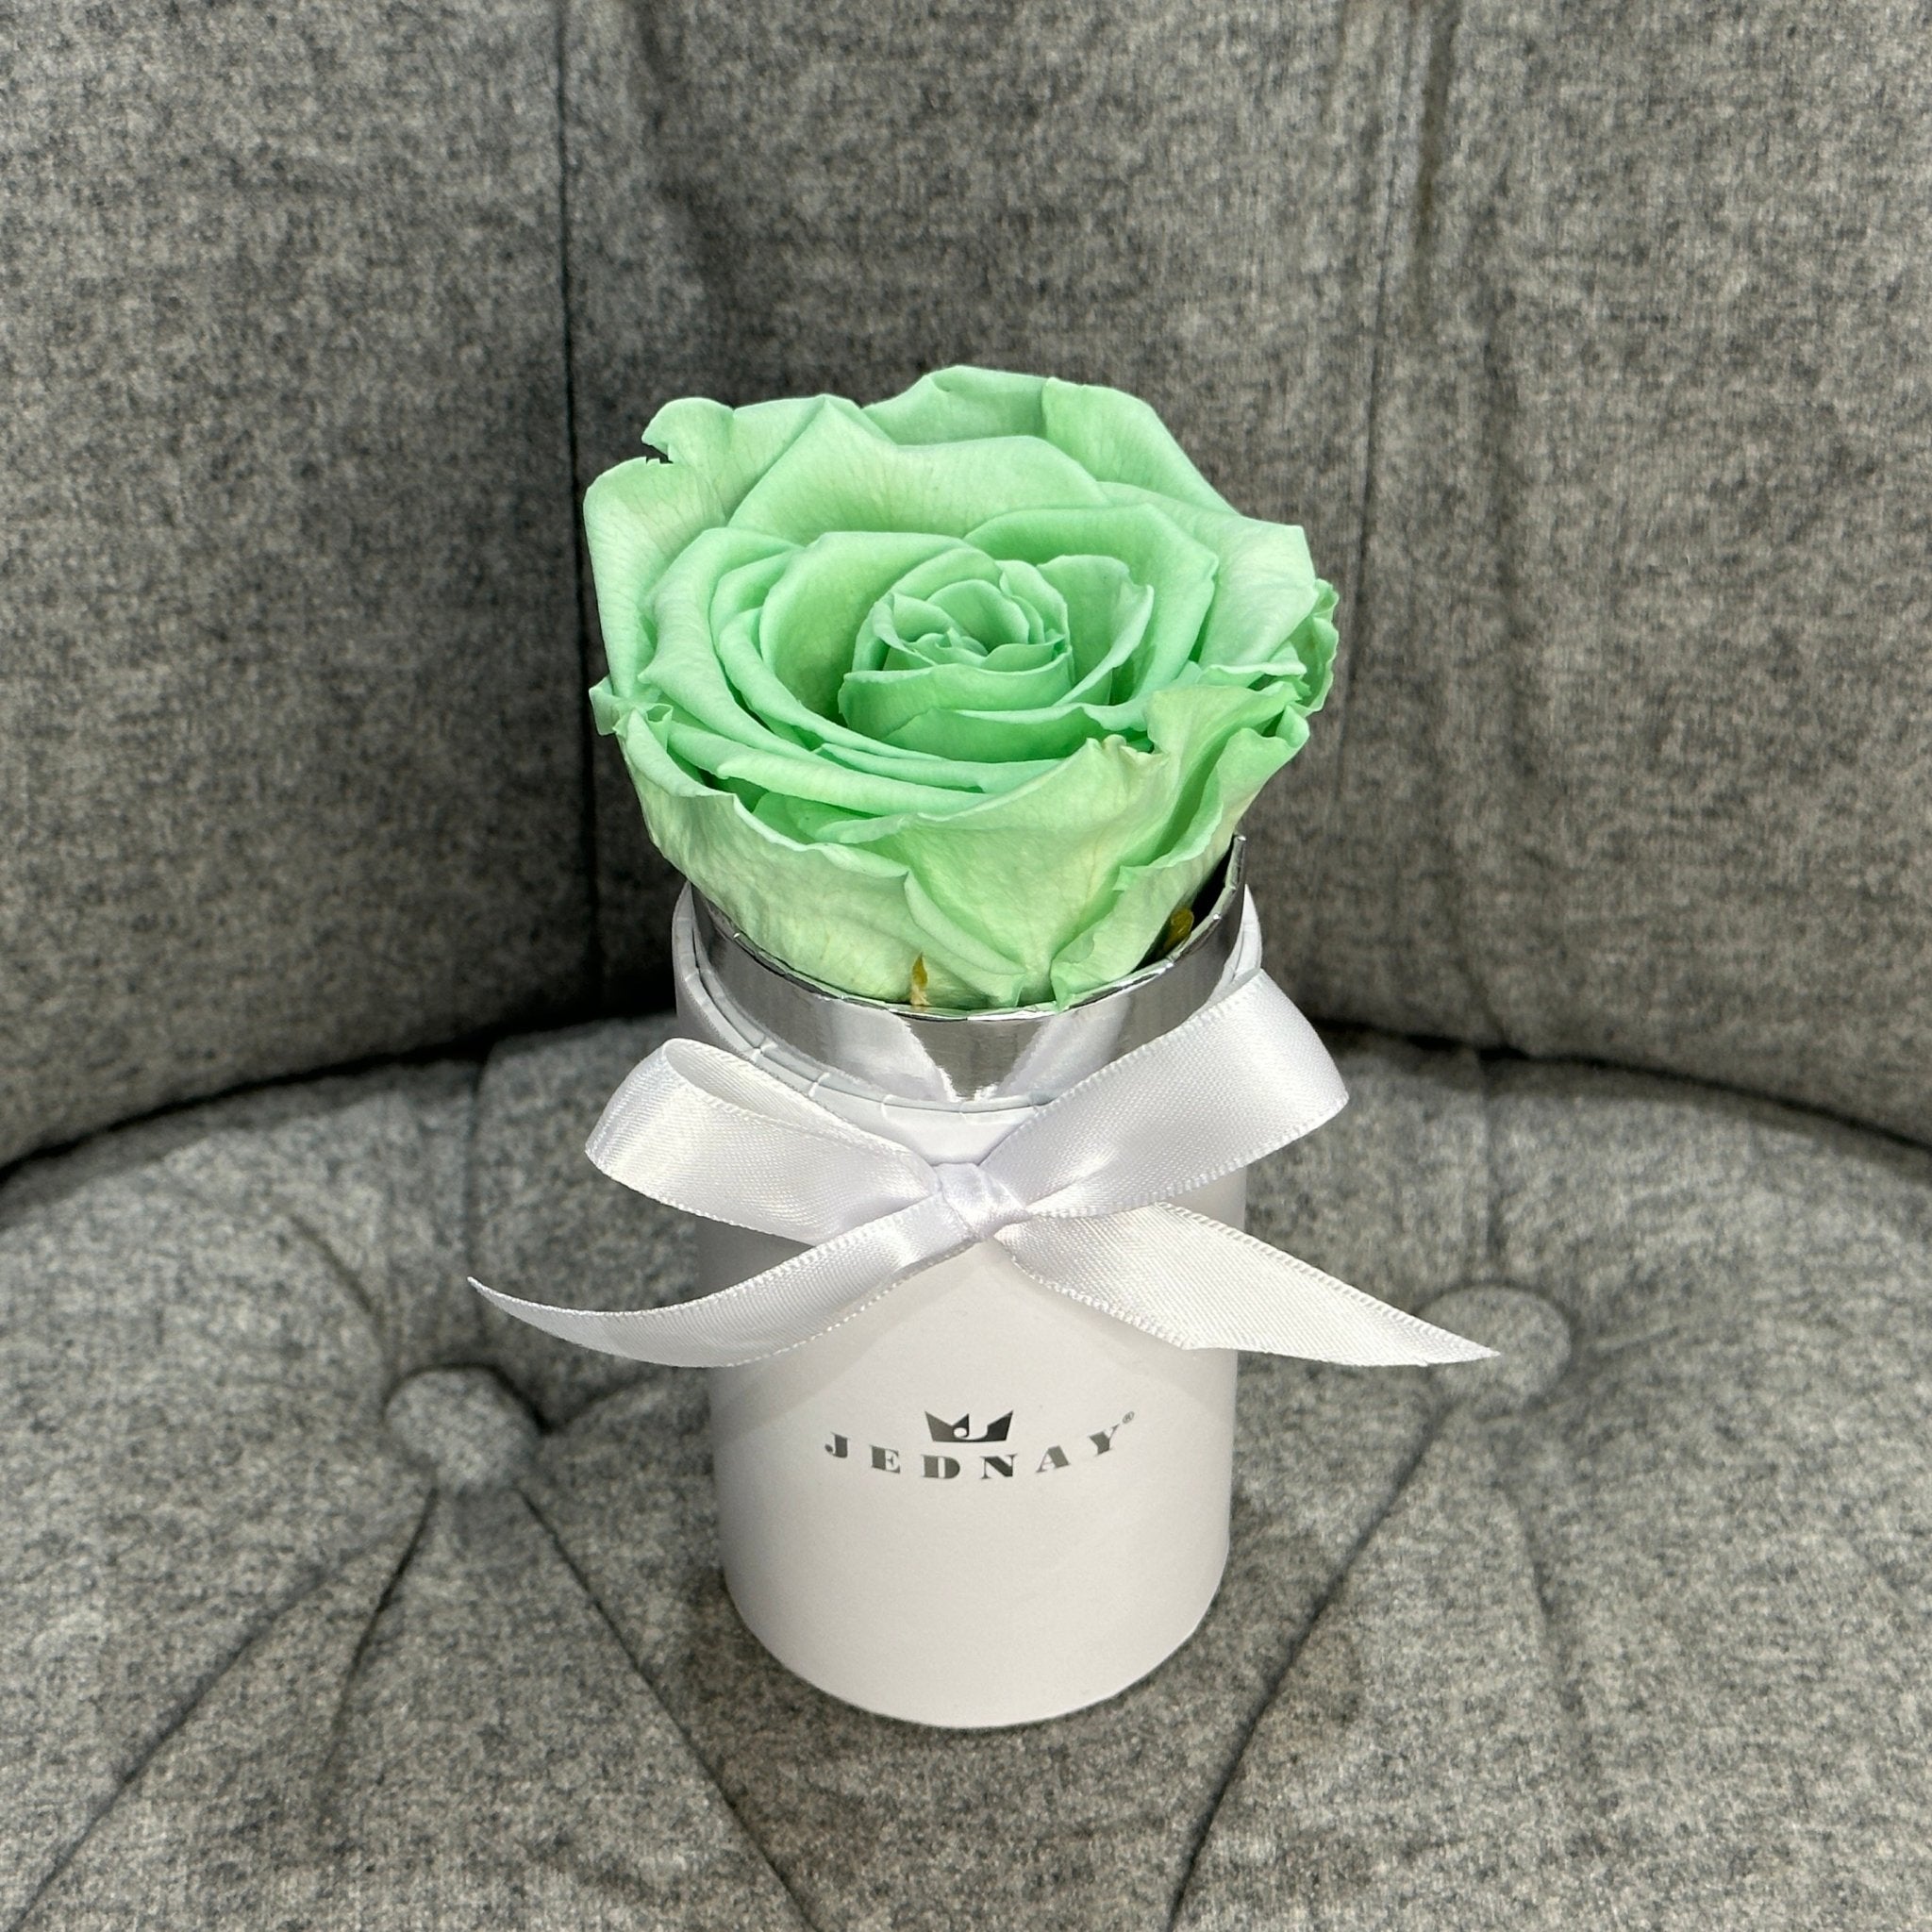 The Uno - Peppermint Tea Eternal Rose - Classic White Box - Jednay Roses